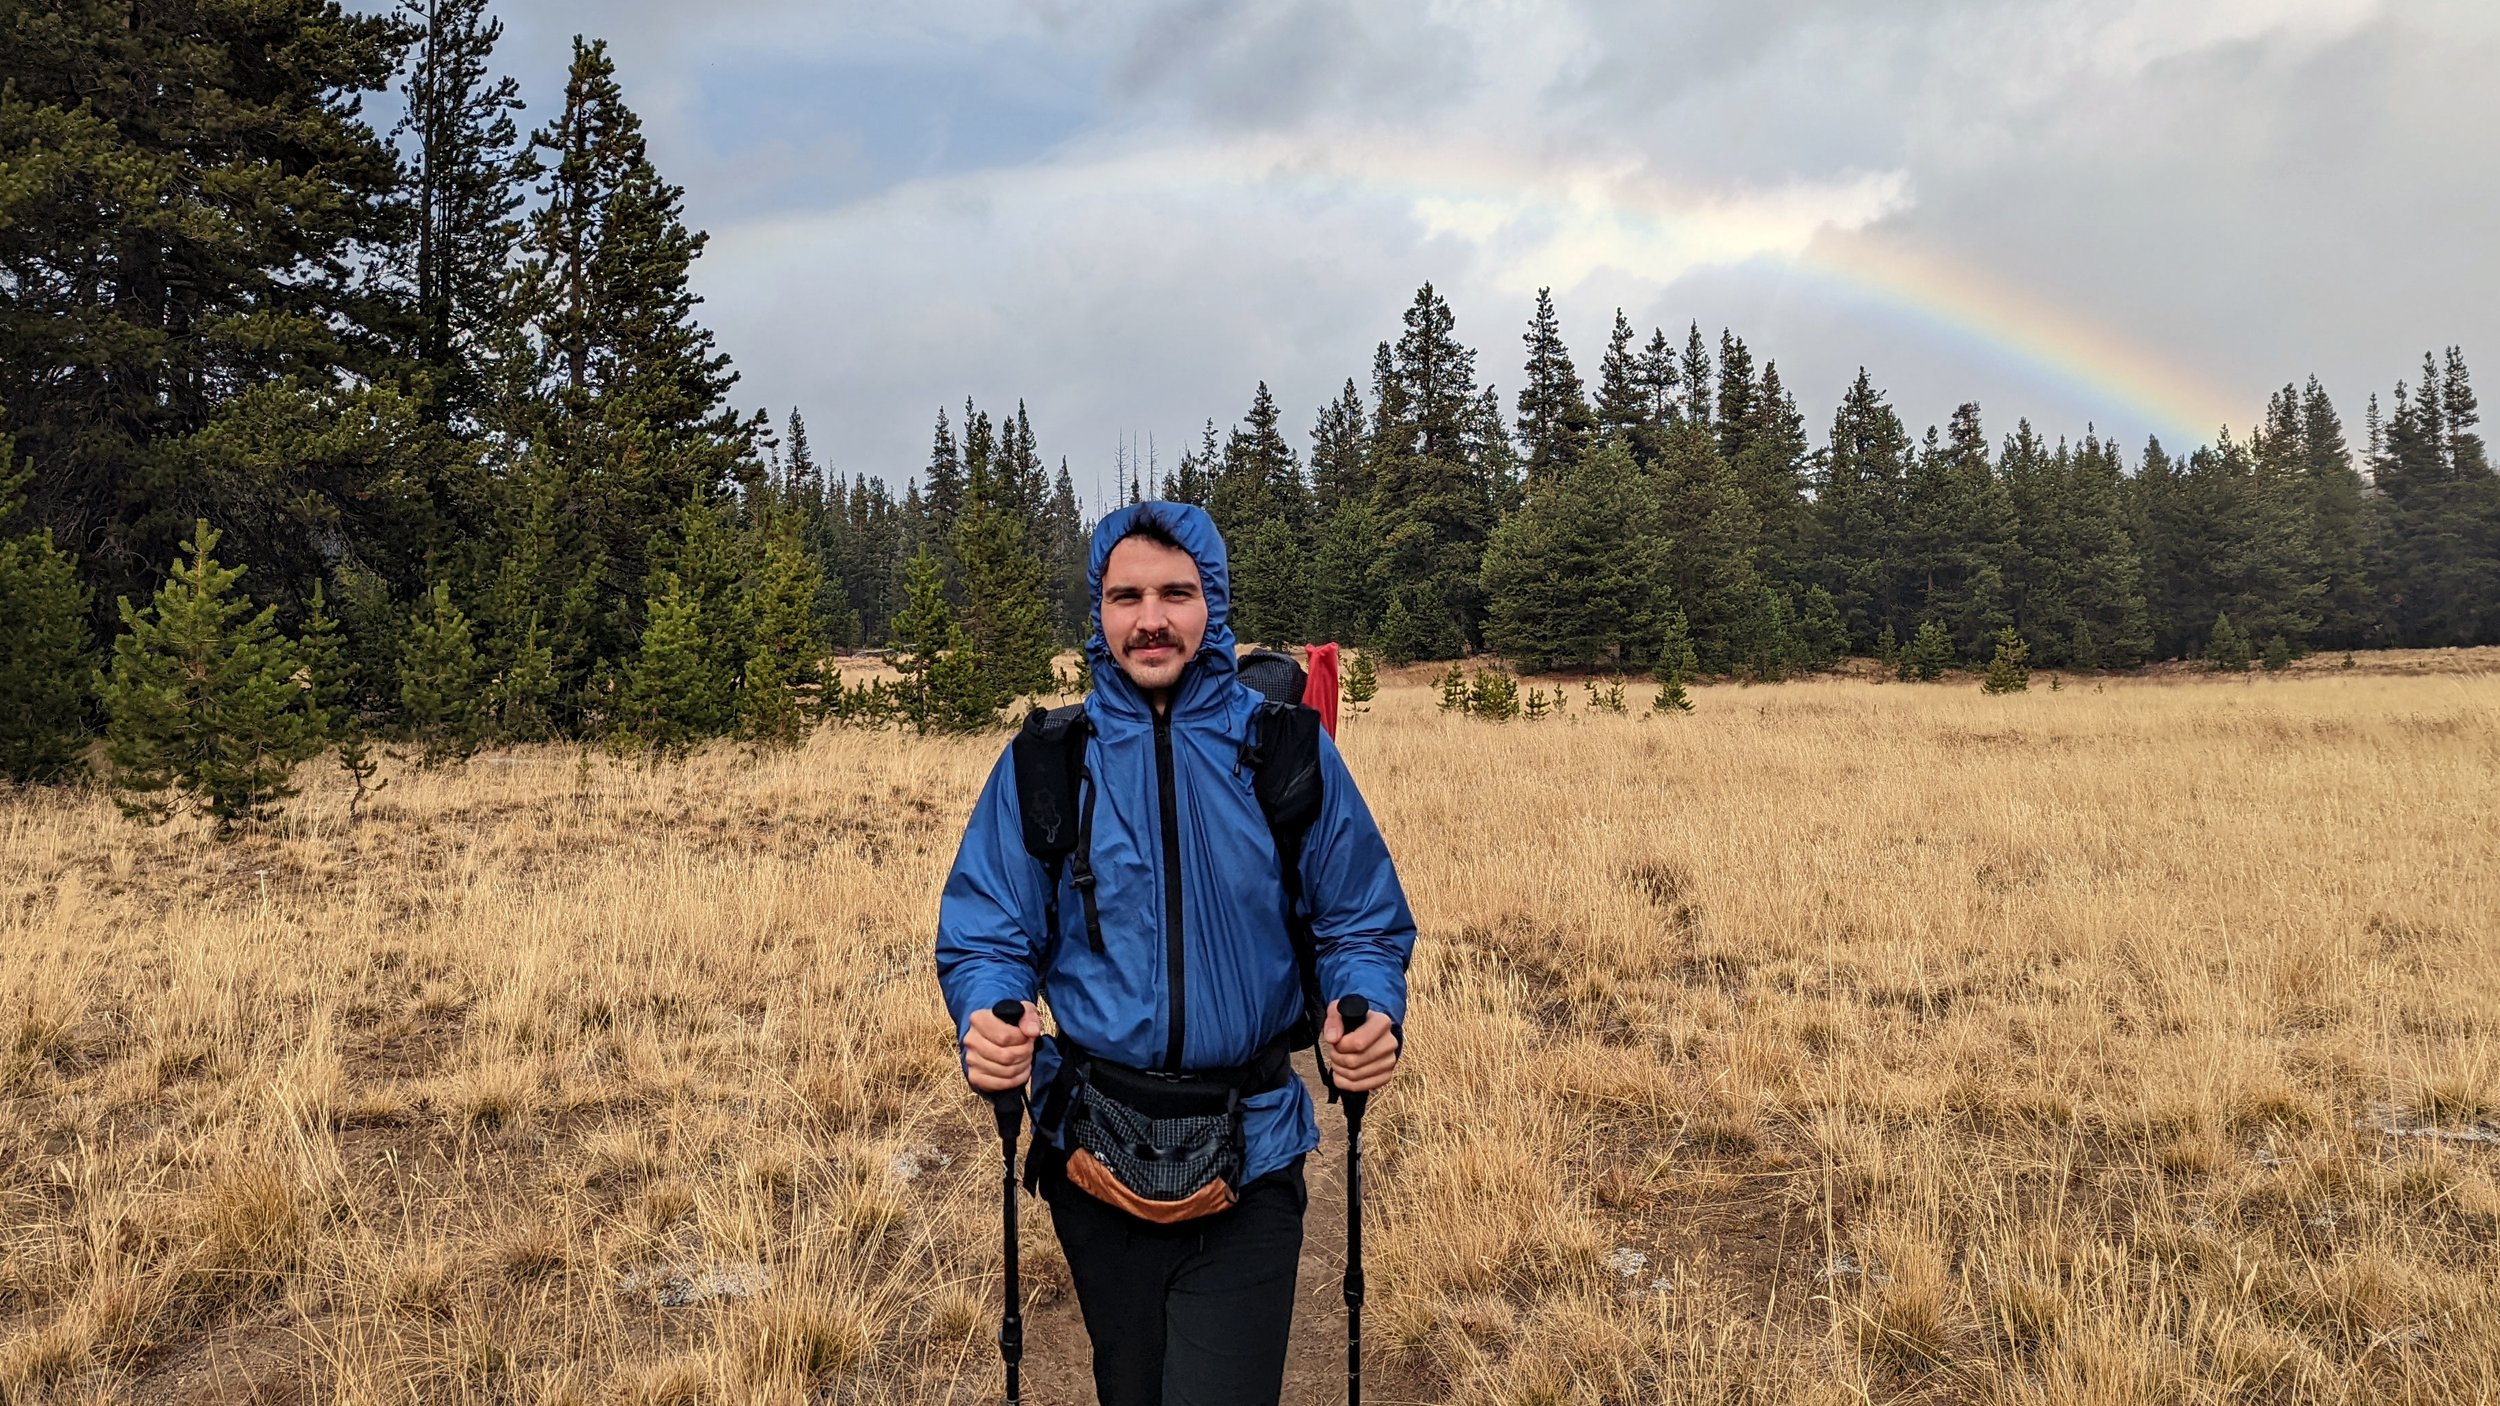 A hiker wearing the Enlightened Equipment Visp Rain jacket on a trail with a rainbow in the background